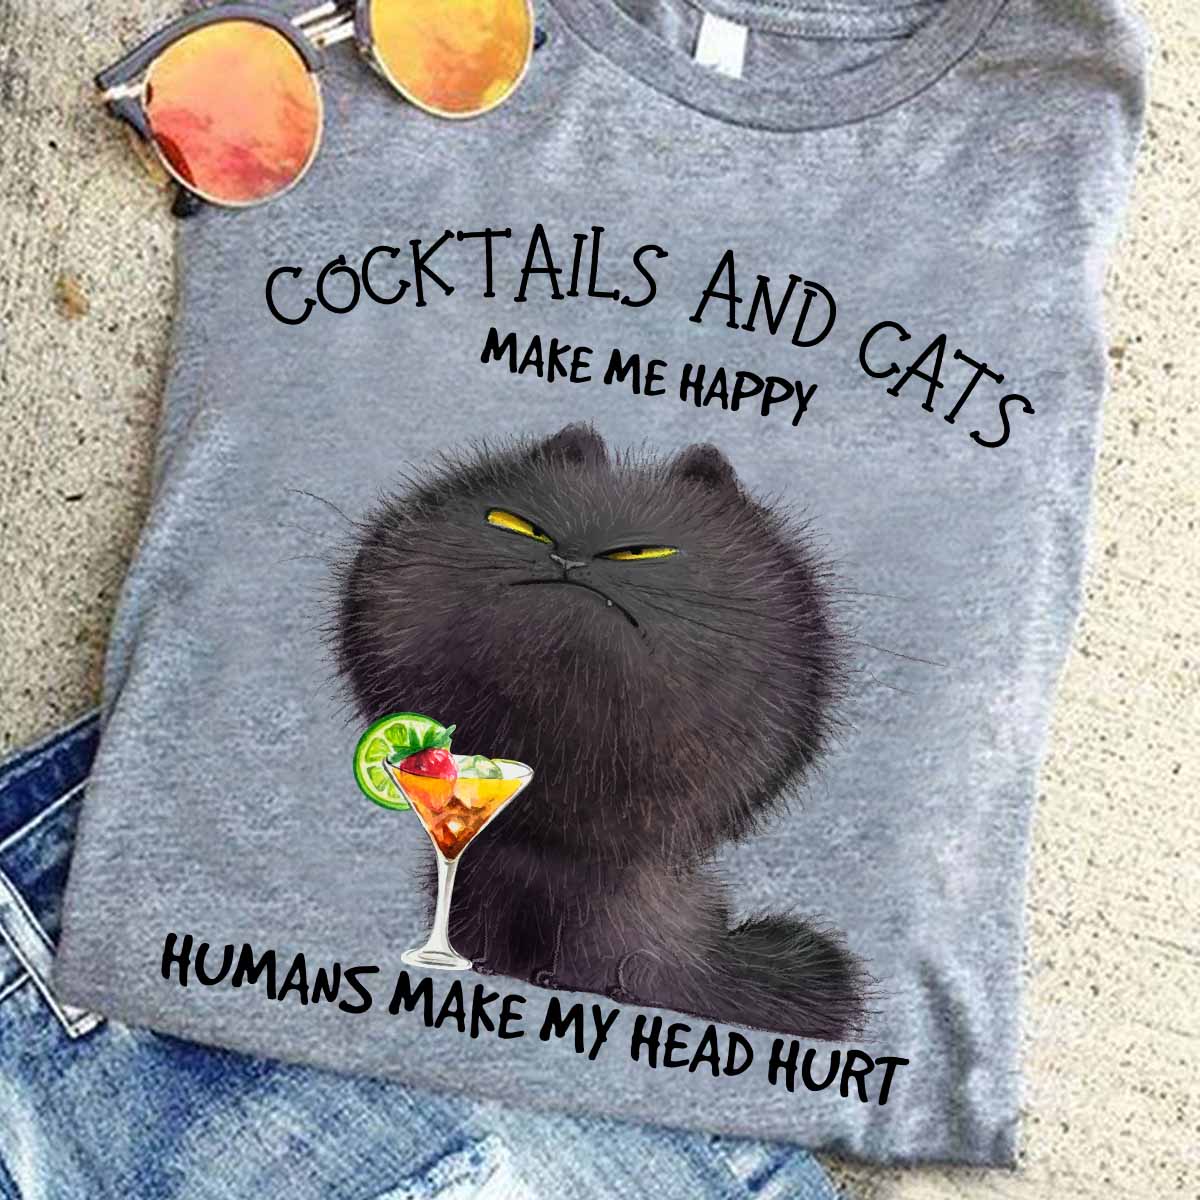 Cocktails and cats make me happy humans make my head hurt - Cocktails and cats